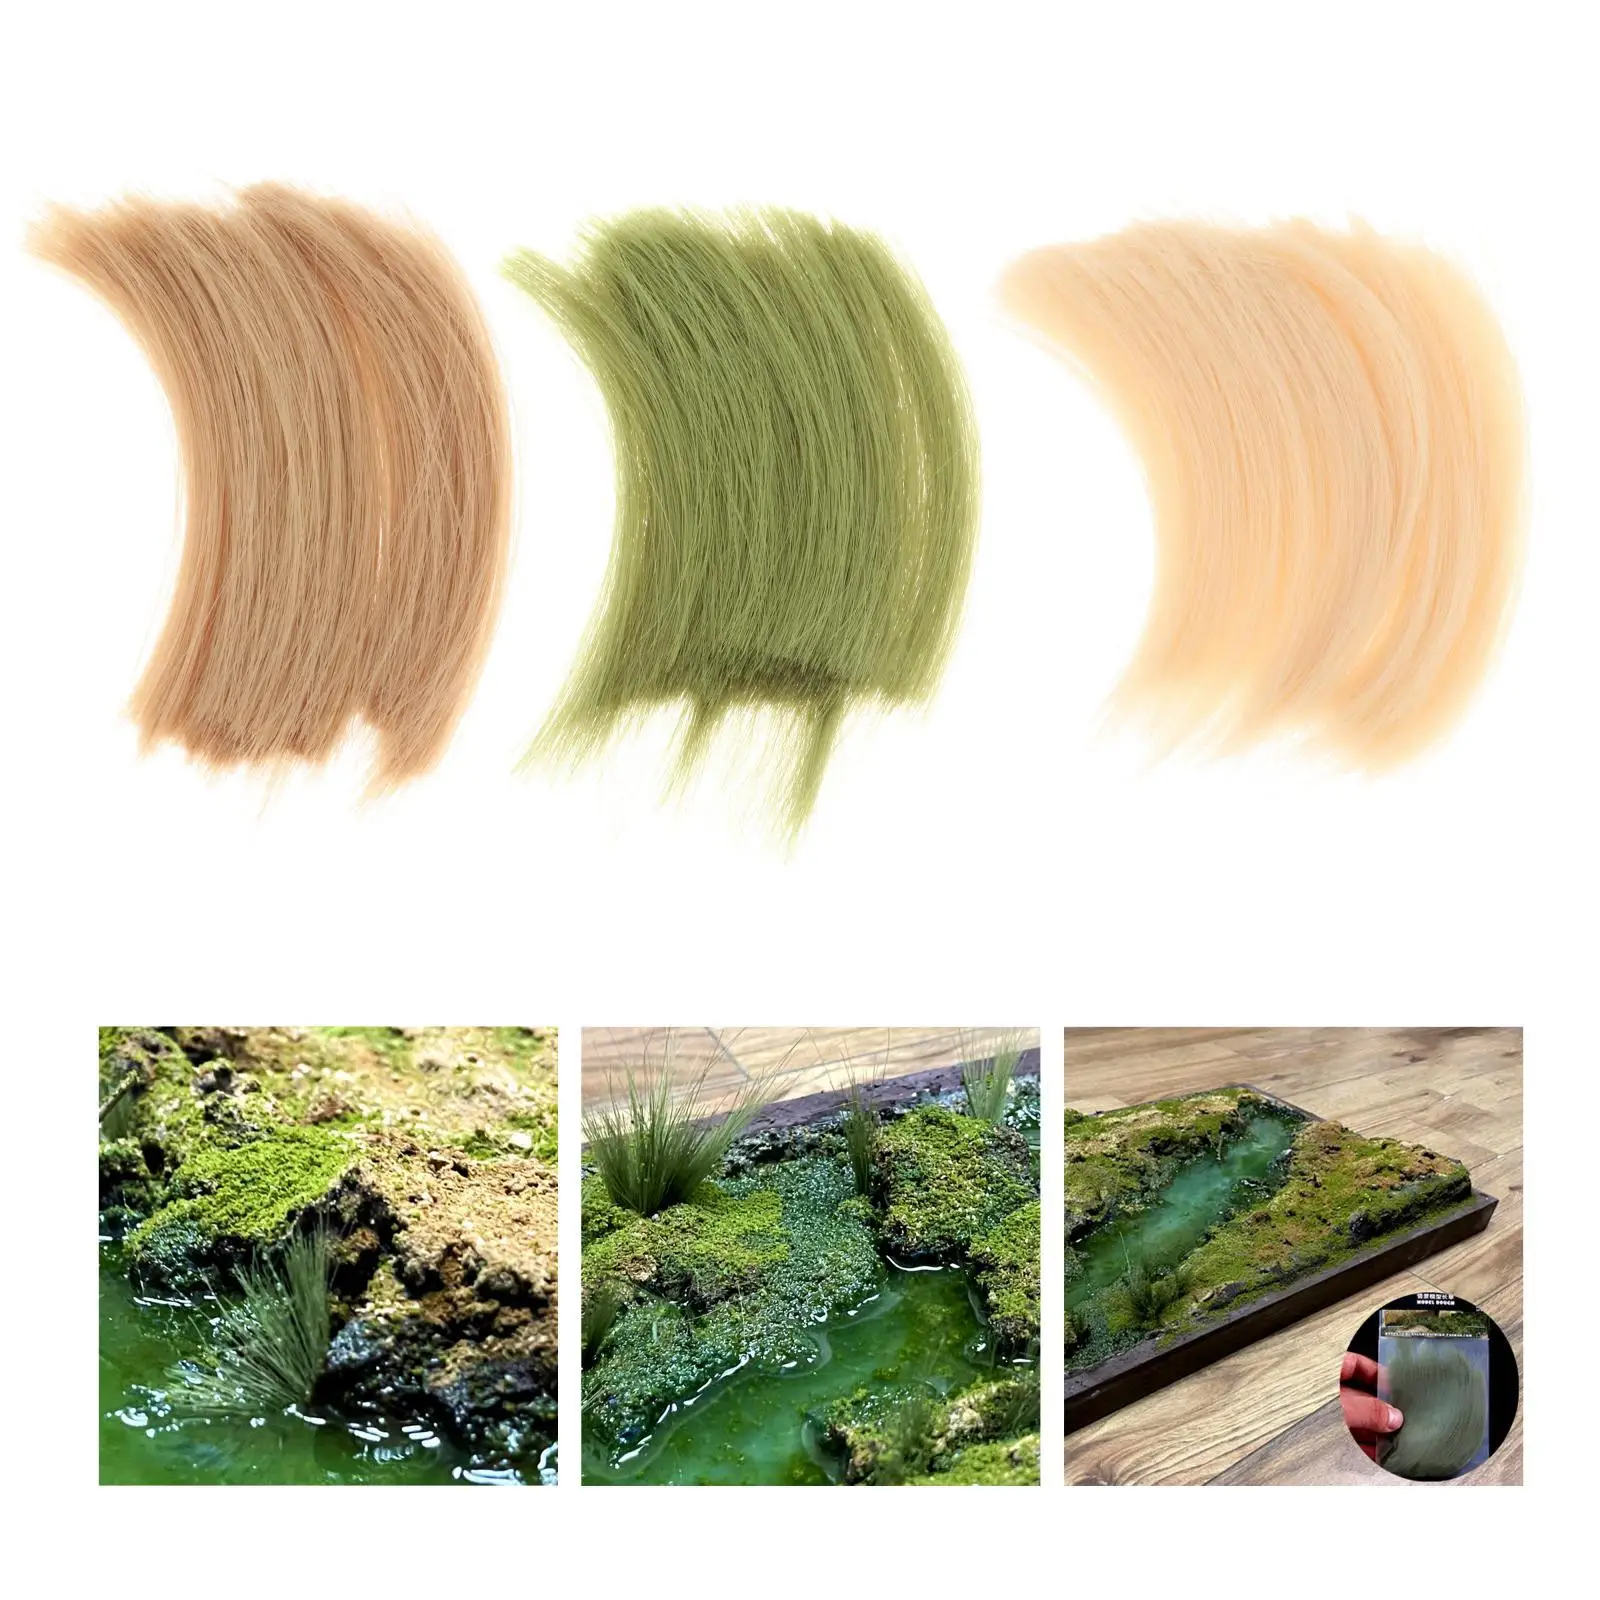 Resin Long Grass Model Making Material Toys Layout Supplies for Sand Table